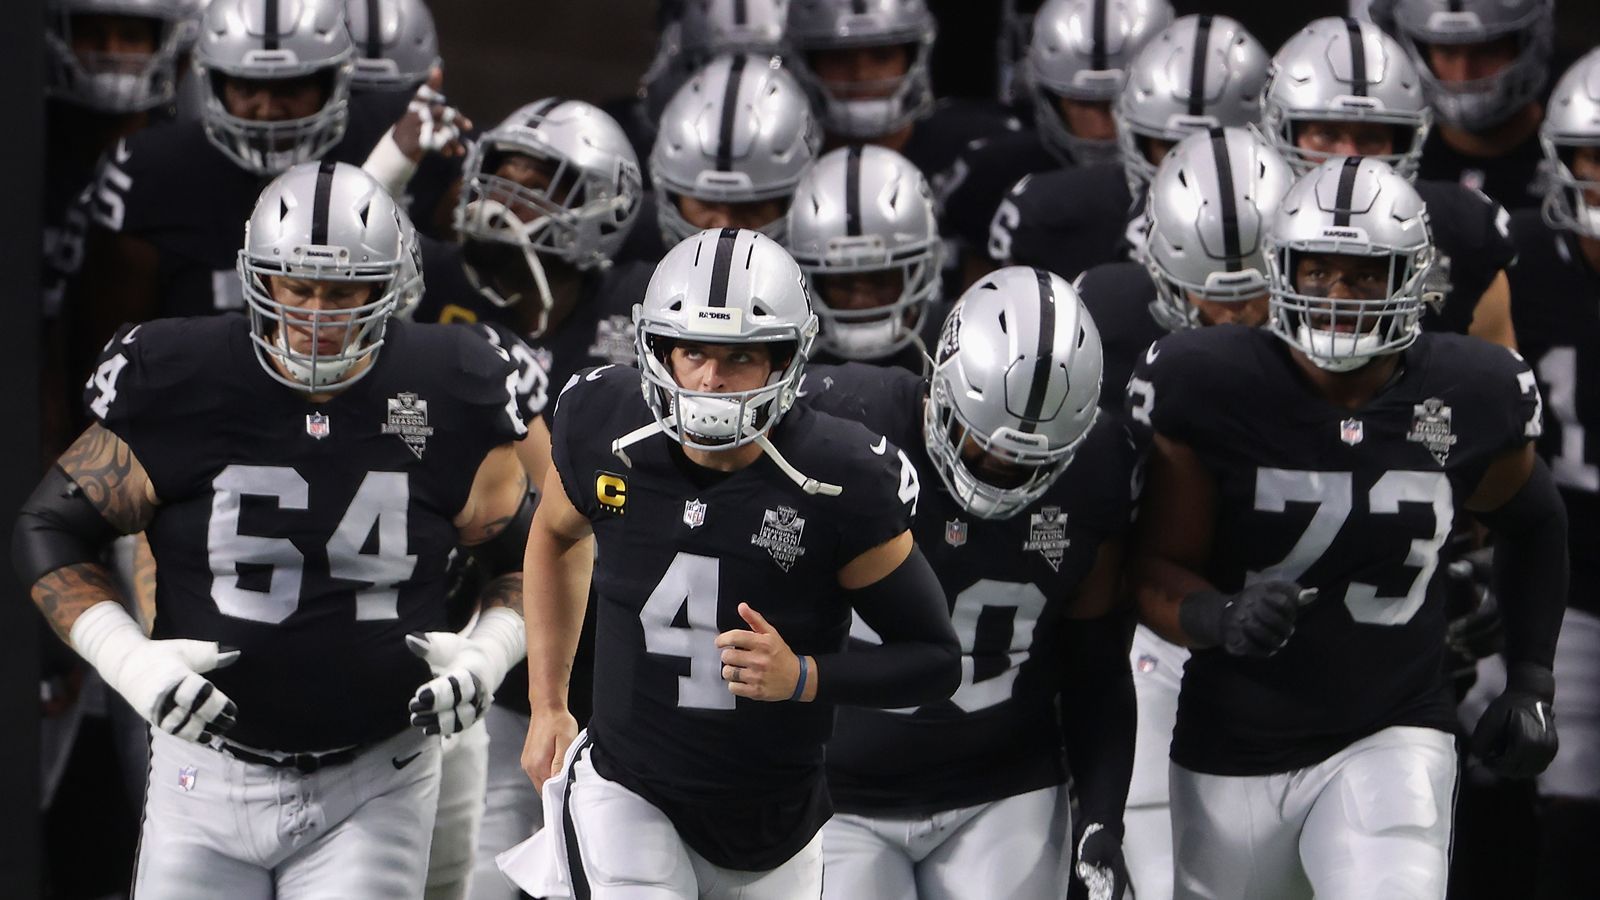 
                <strong>Las Vegas Raiders</strong><br>
                &#x2022; 1. Runde (Pick 17: Alex Leatherwood) - <br>&#x2022; 2. Runde (Pick 43: Trevon Moehrig) - <br>&#x2022; 3. Runde (Pick 79: Malcolm Koonce, Pick 80: Divine Deablo) - <br>&#x2022; 4. Runde (Pick 143: Tyree Gillespie) - <br>&#x2022; 5. Runde (Pick 167: Nate Hobbs) - <br>&#x2022; 7. Runde (Pick 230: Jimmy Morrissey)<br>
              